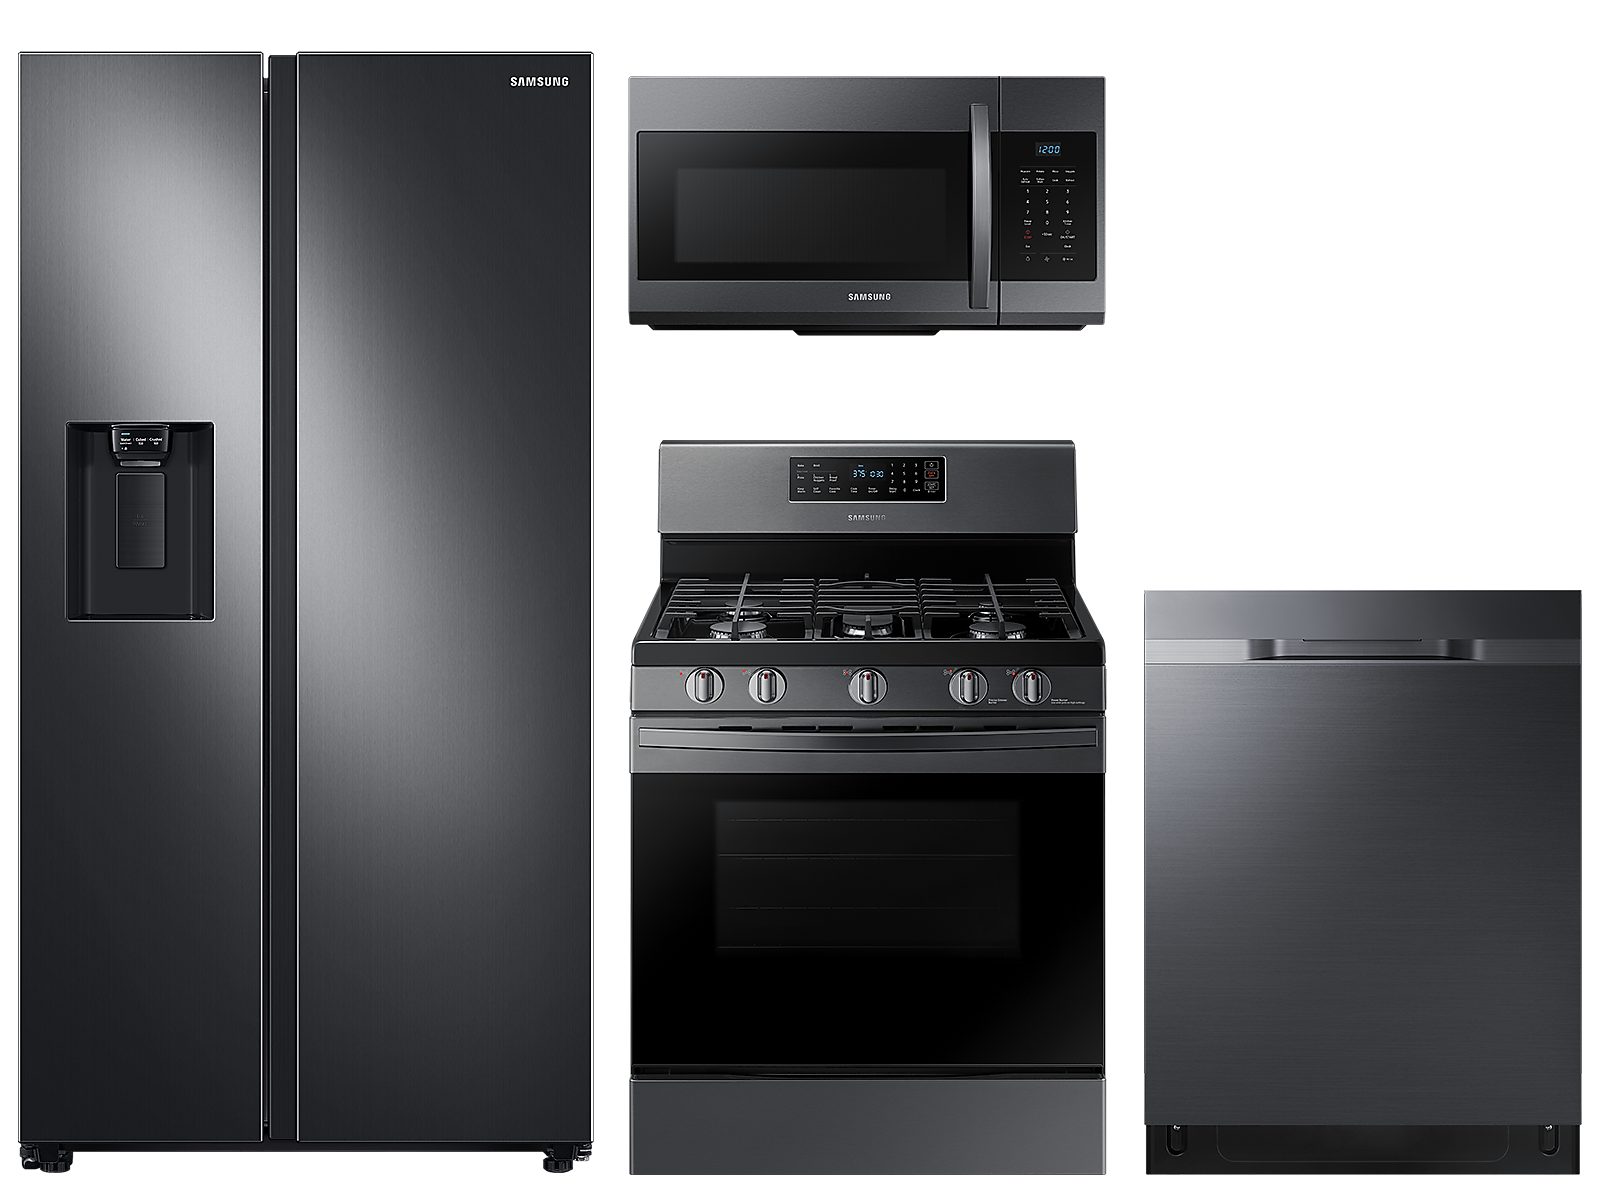 Samsung Large capacity Side-by-Side refrigerator & gas range package in Black stainless(BNDL-1590167937972) photo